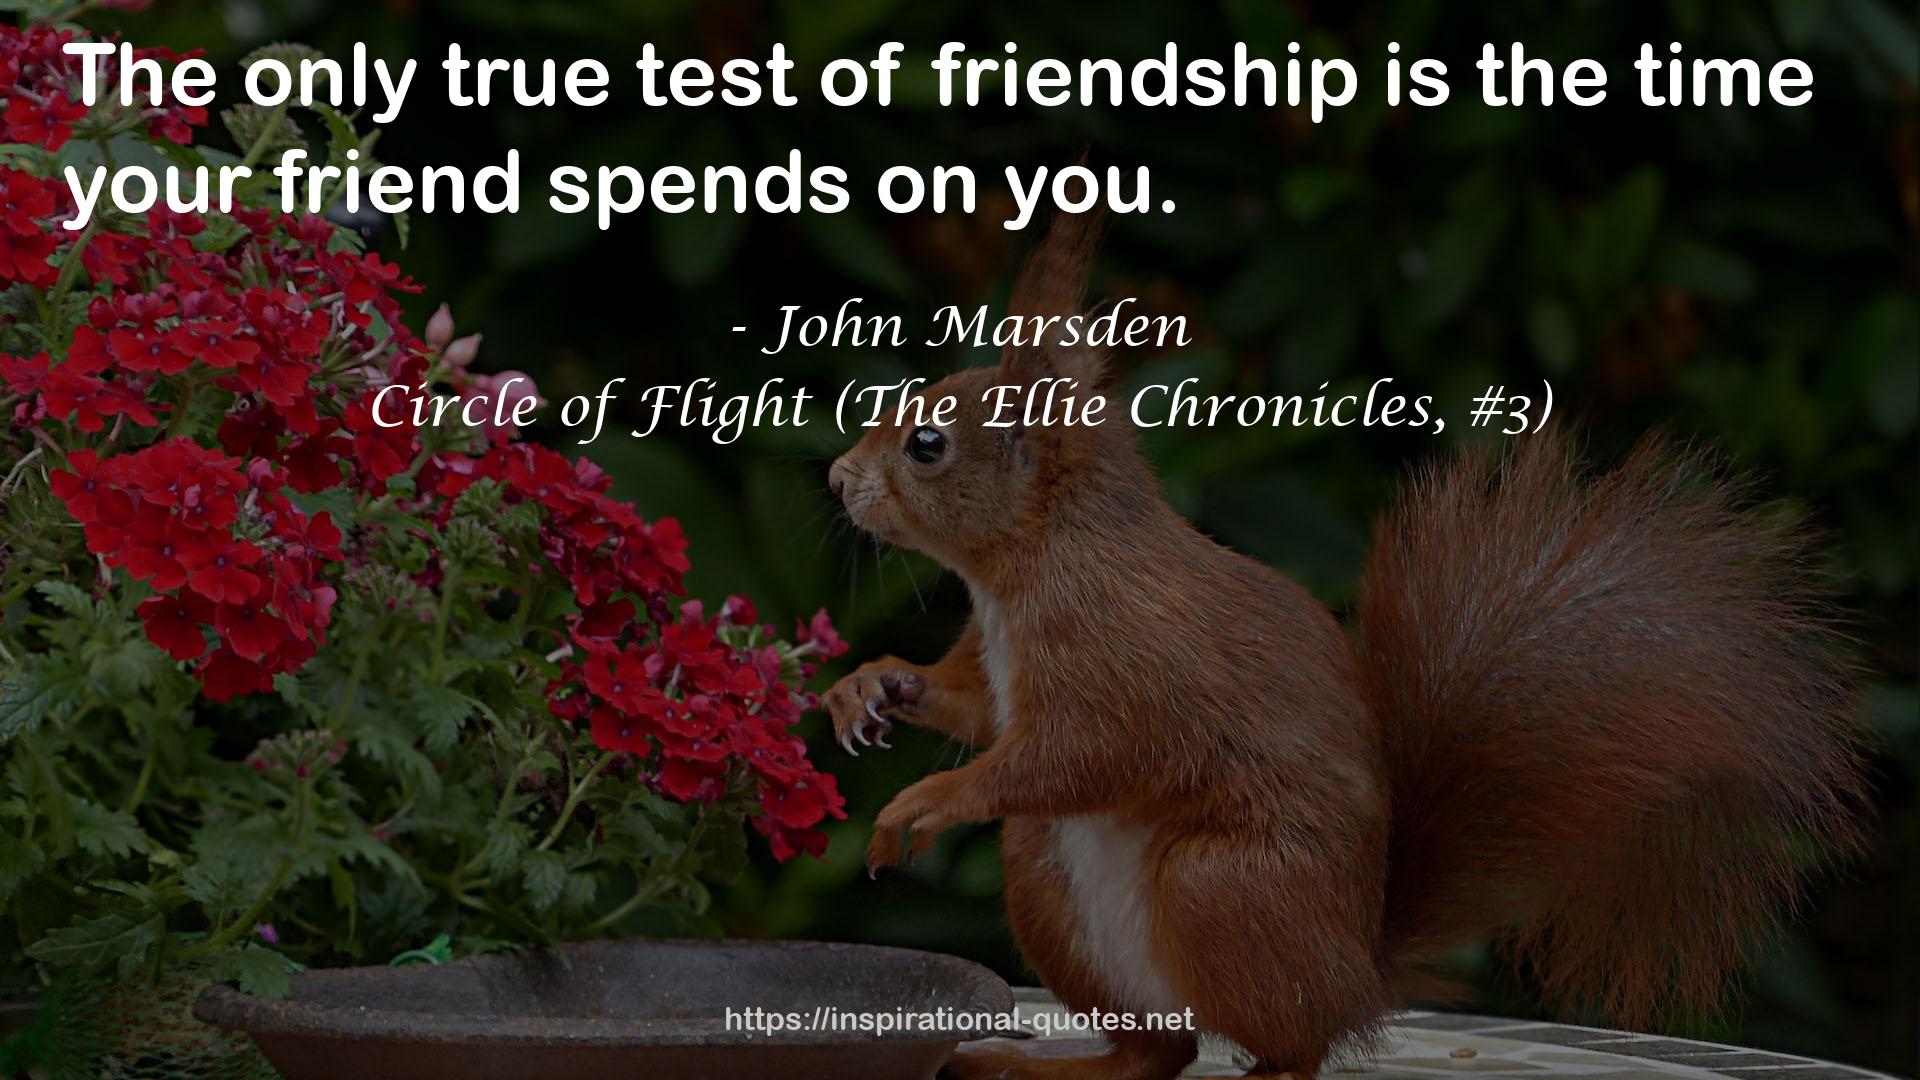 Circle of Flight (The Ellie Chronicles, #3) QUOTES